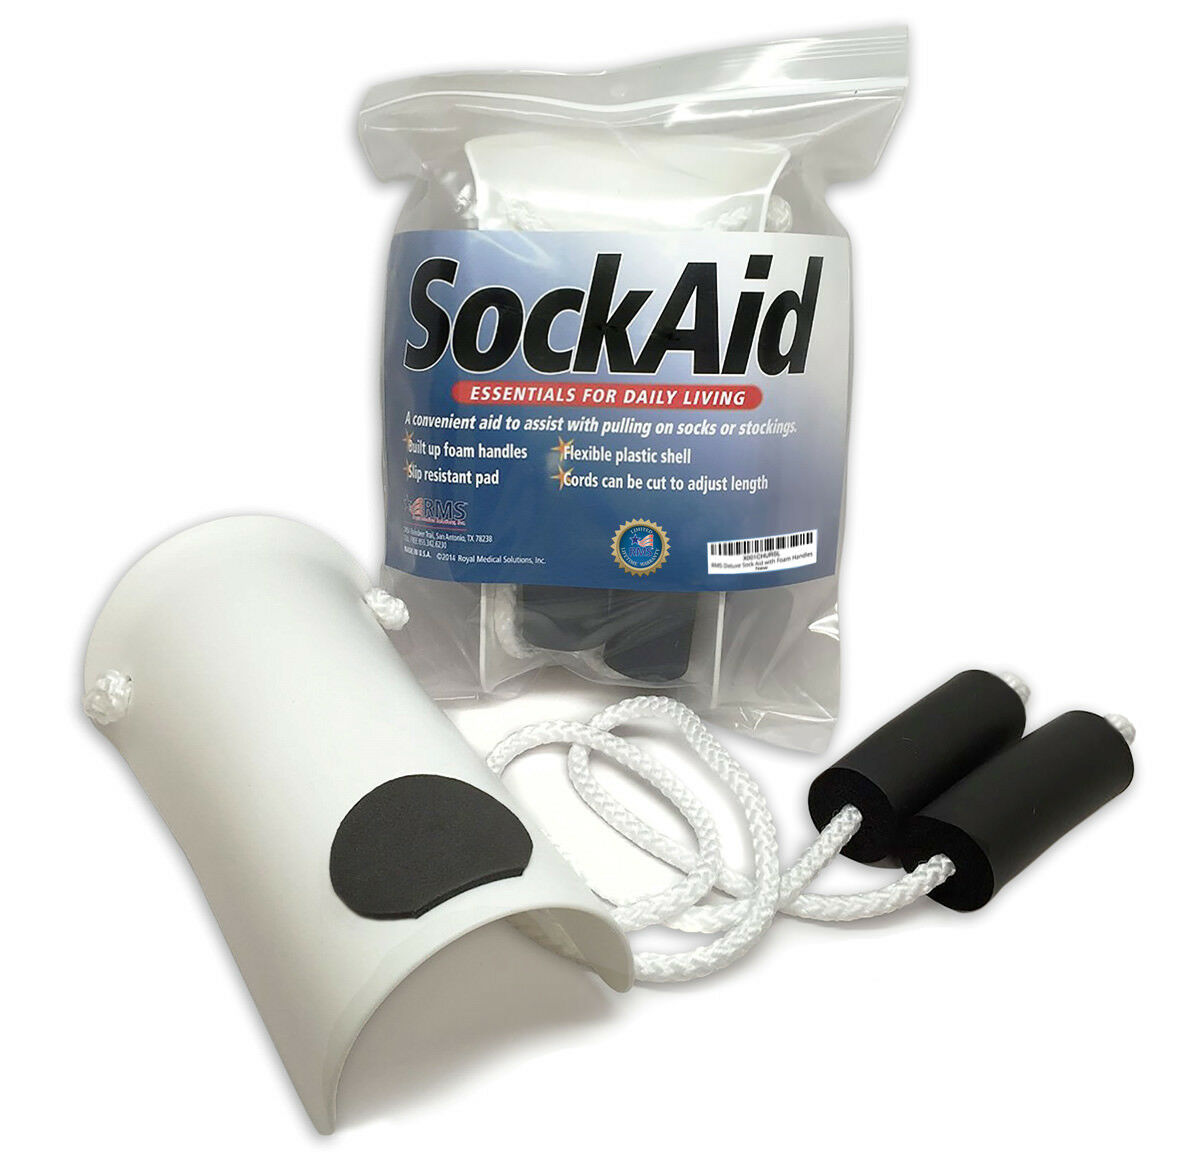 Rms Sock Aid, Stocking Donner, Sock Puller, Limited Lifetime Warranty